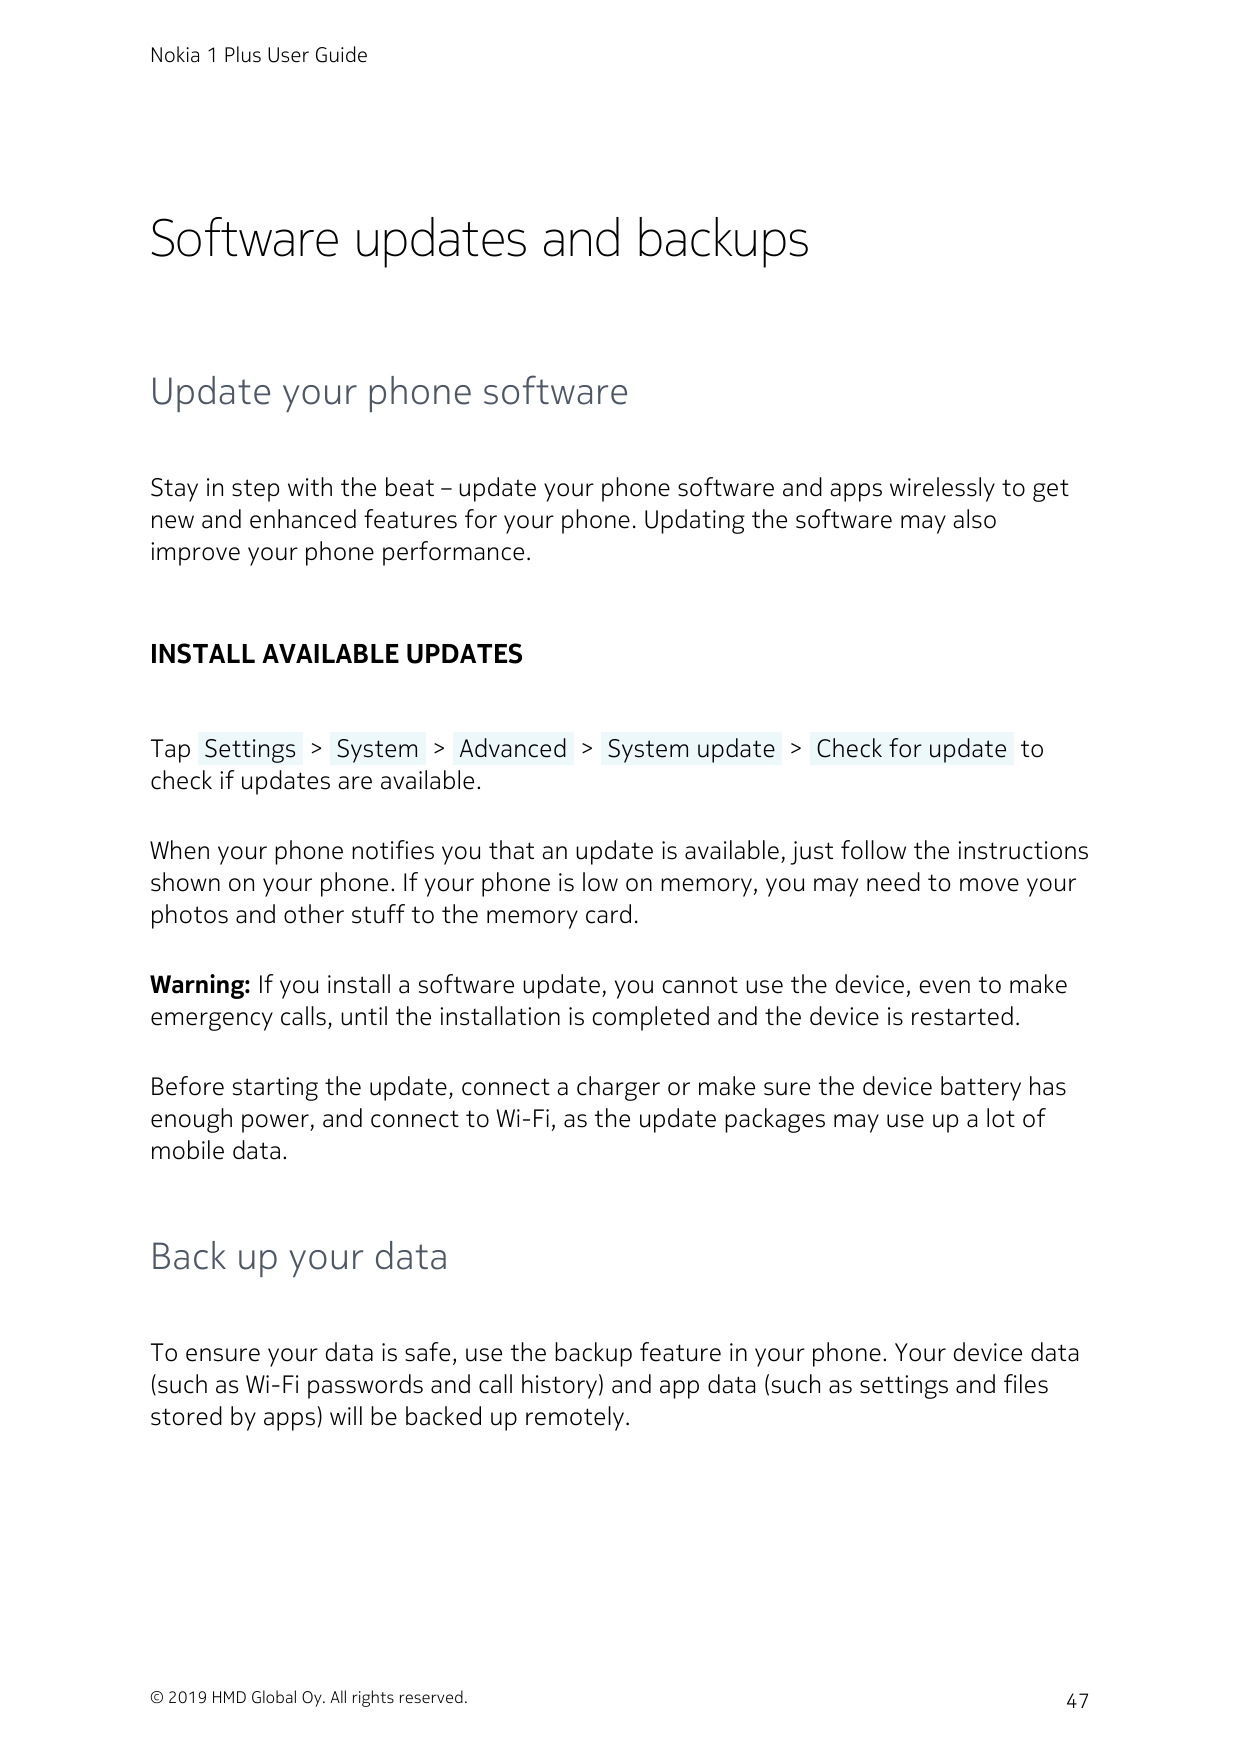 Nokia 1 Plus User GuideSoftware updates and backupsUpdate your phone softwareStay in step with the beat – update your phone soft